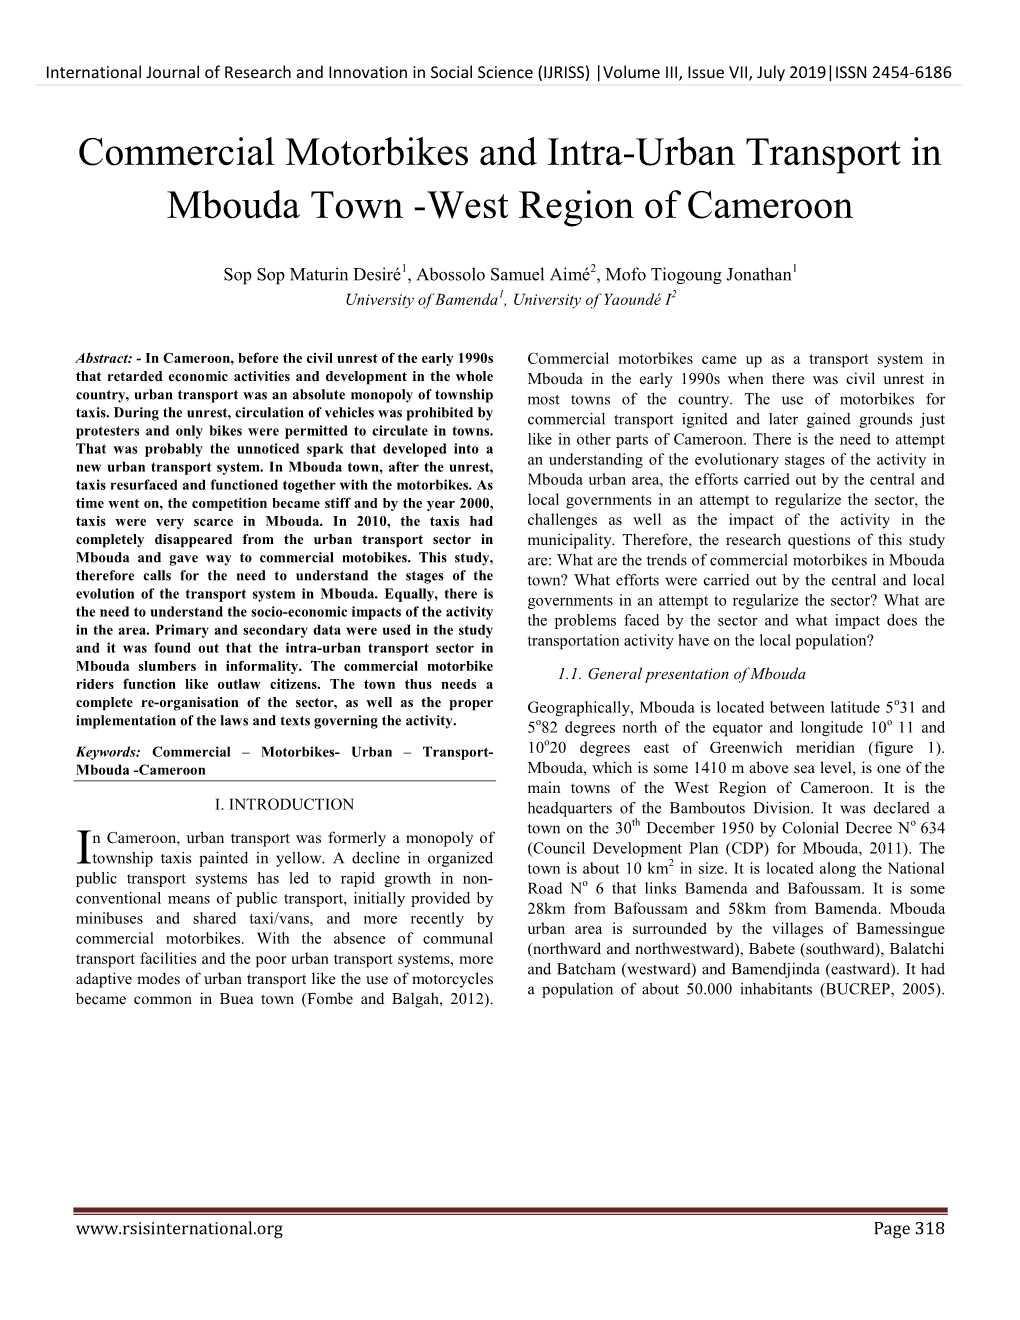 Commercial Motorbikes and Intra-Urban Transport in Mbouda Town -West Region of Cameroon